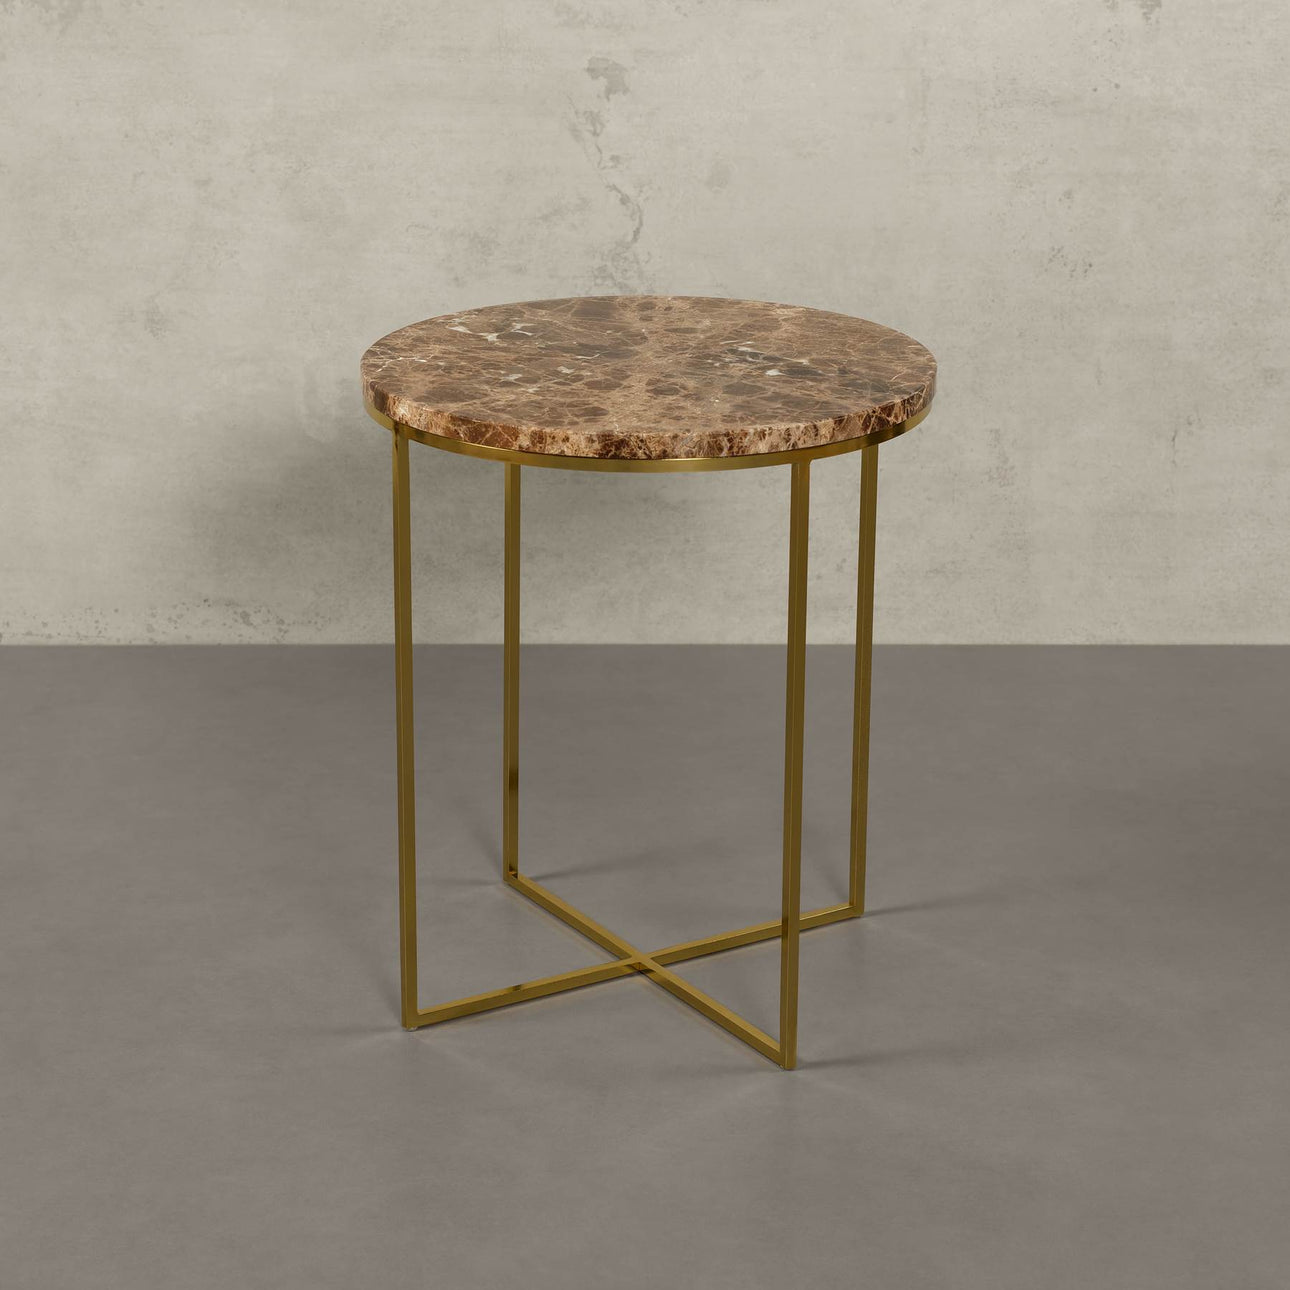 Monte marble side table